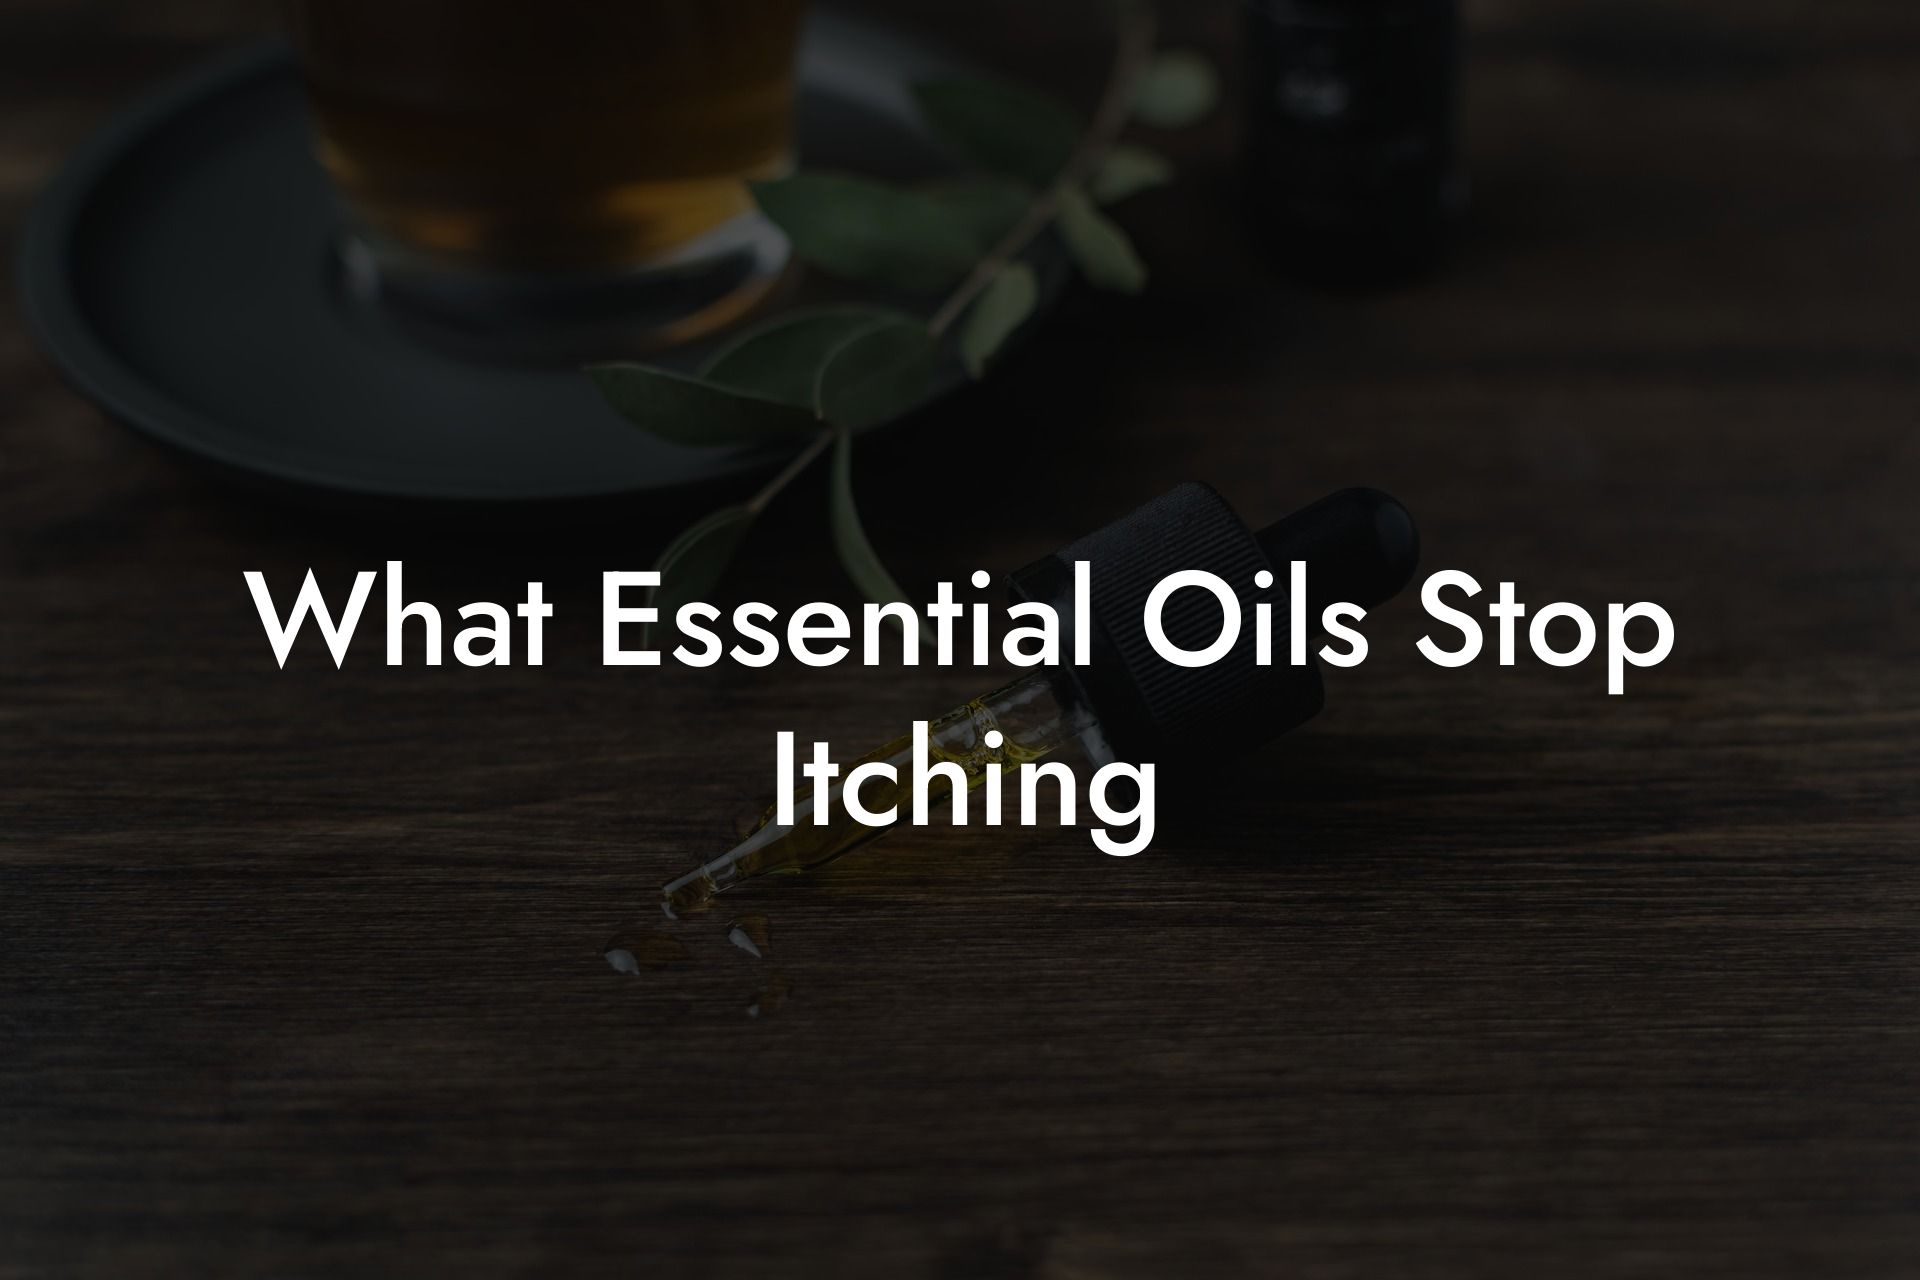 What Essential Oils Stop Itching